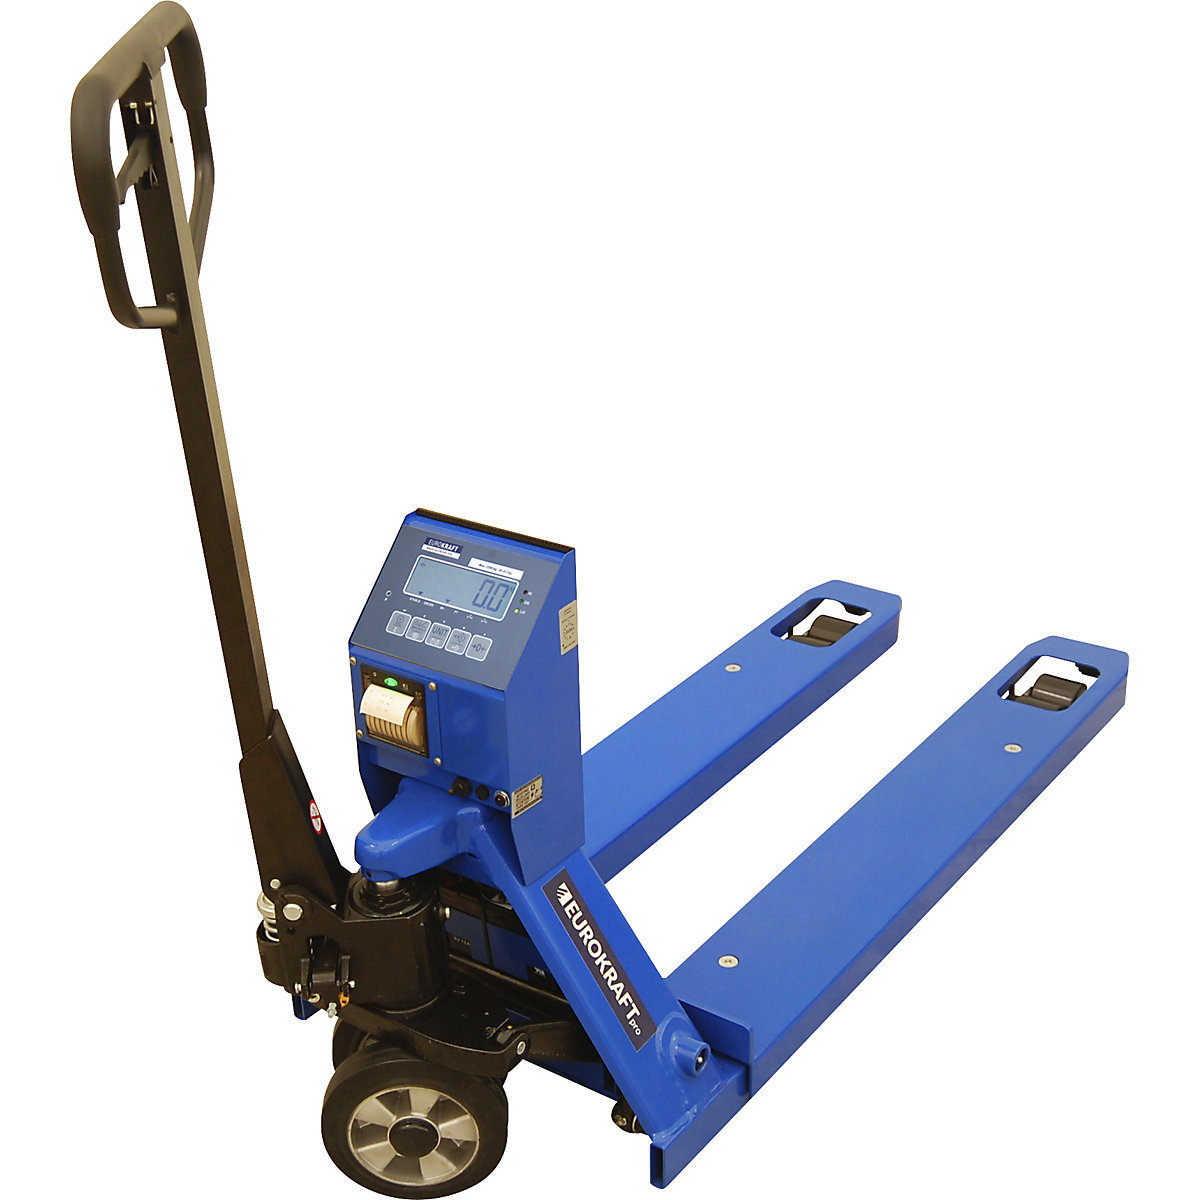 Pallet truck with weighing scale - eurokraft pro